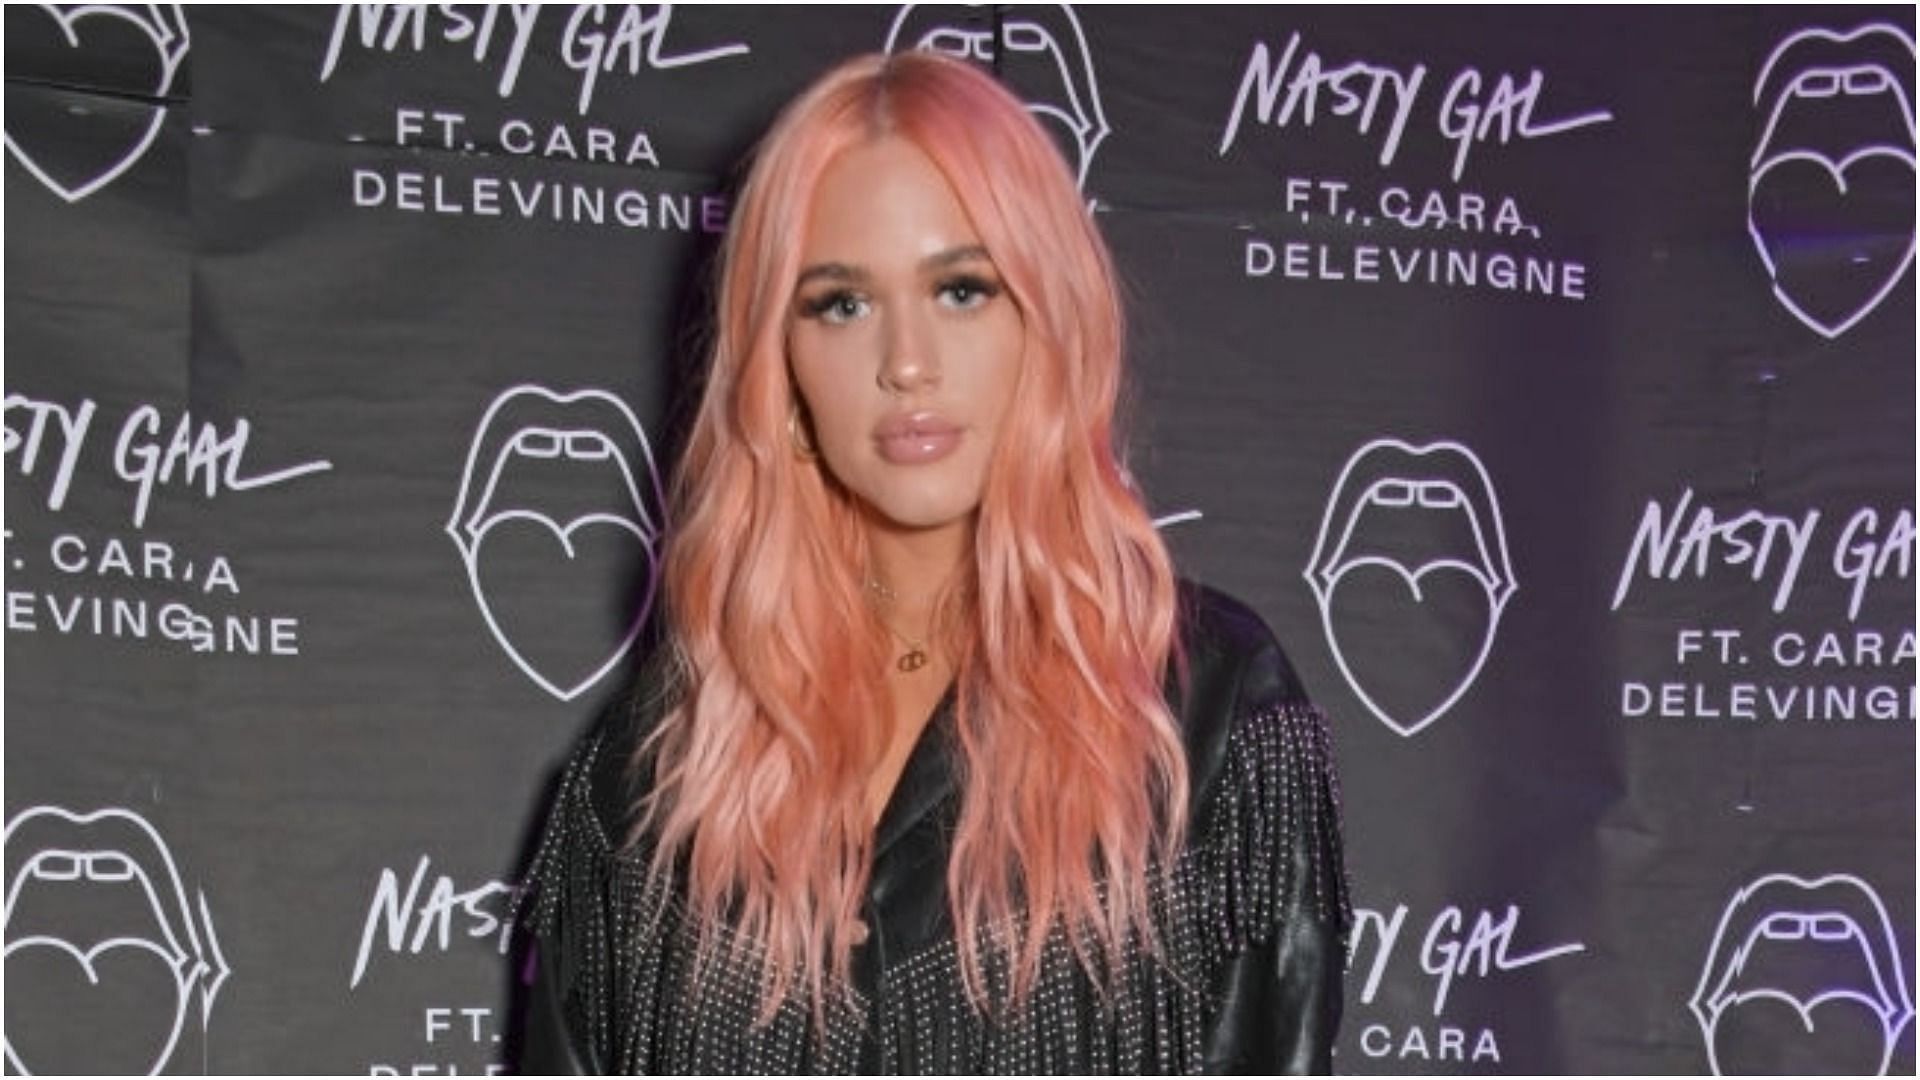 Lottie Tomlinson attends the launch of Nasty Gal Ft. Cara Delevingne (Image via David M. Benett/Getty Images)